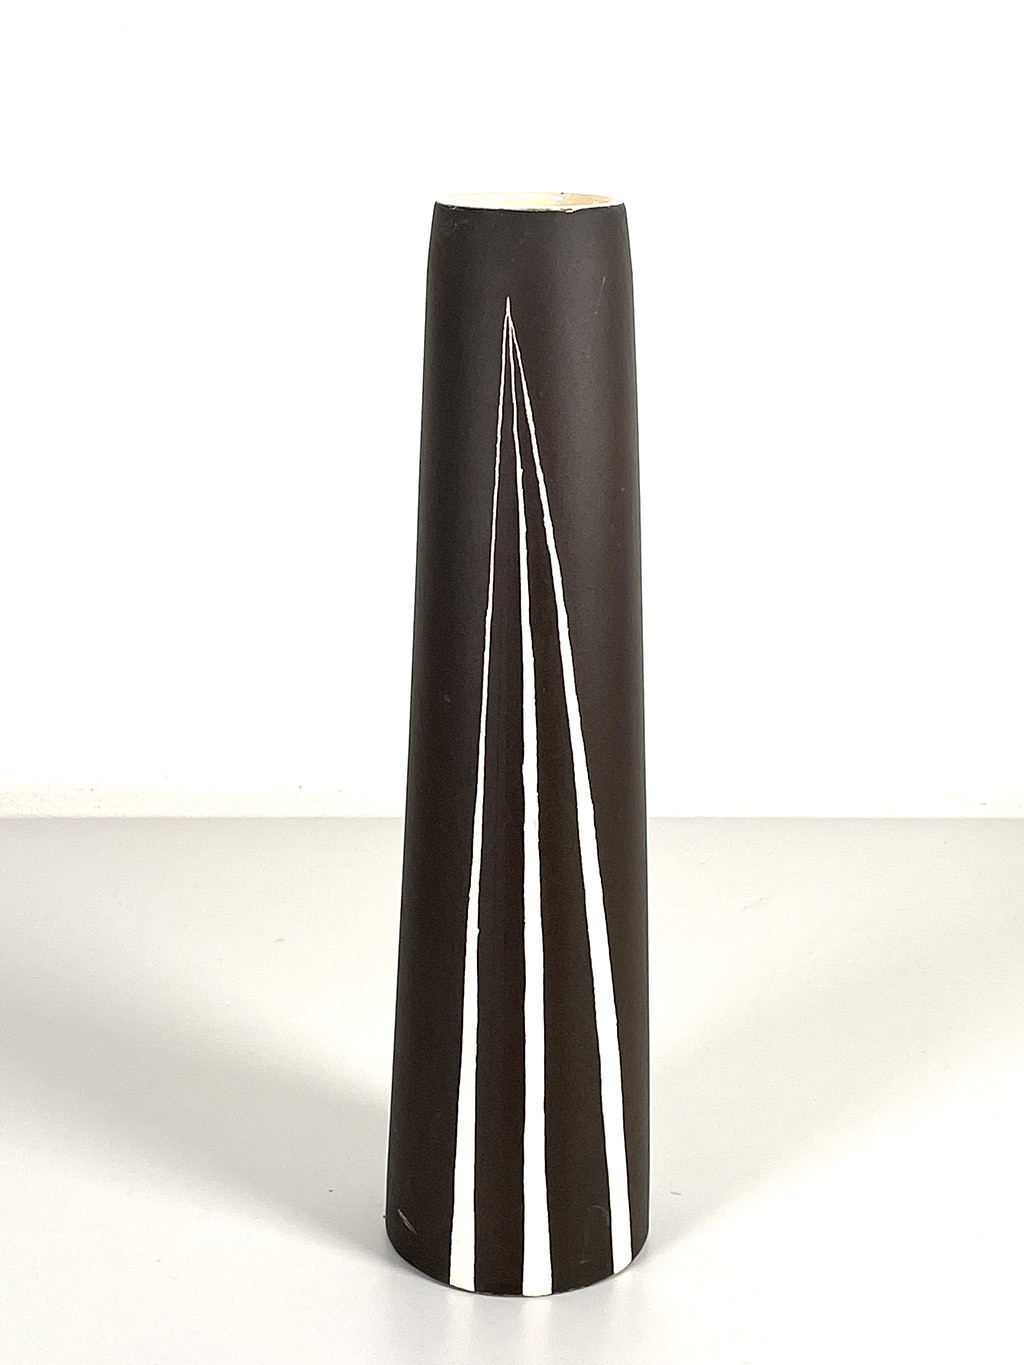 Conical shaped vase